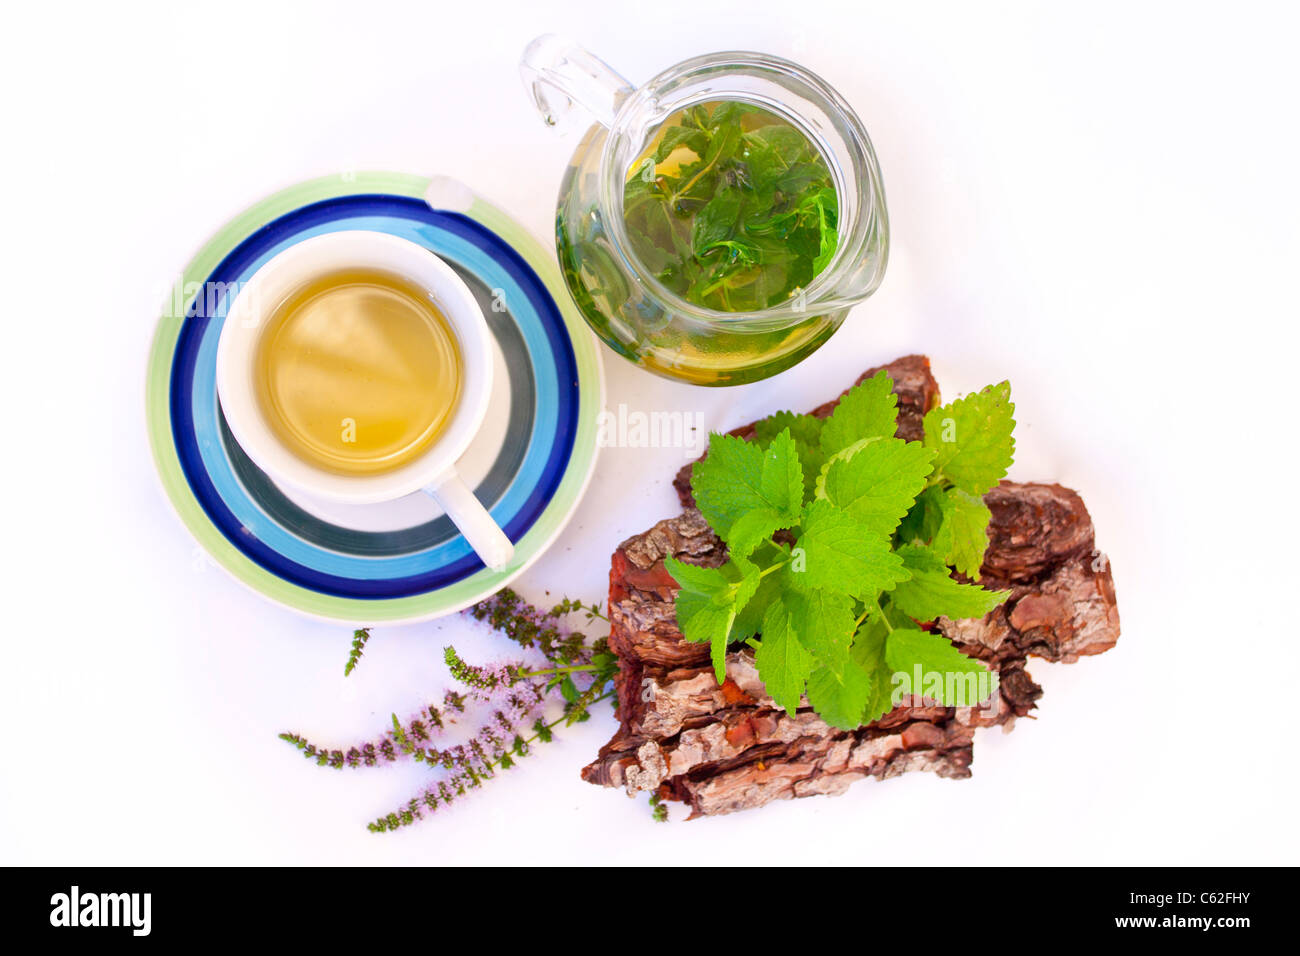 Lemon balm accompanied by a hot pitcher and a wood bark with leaves Stock Photo